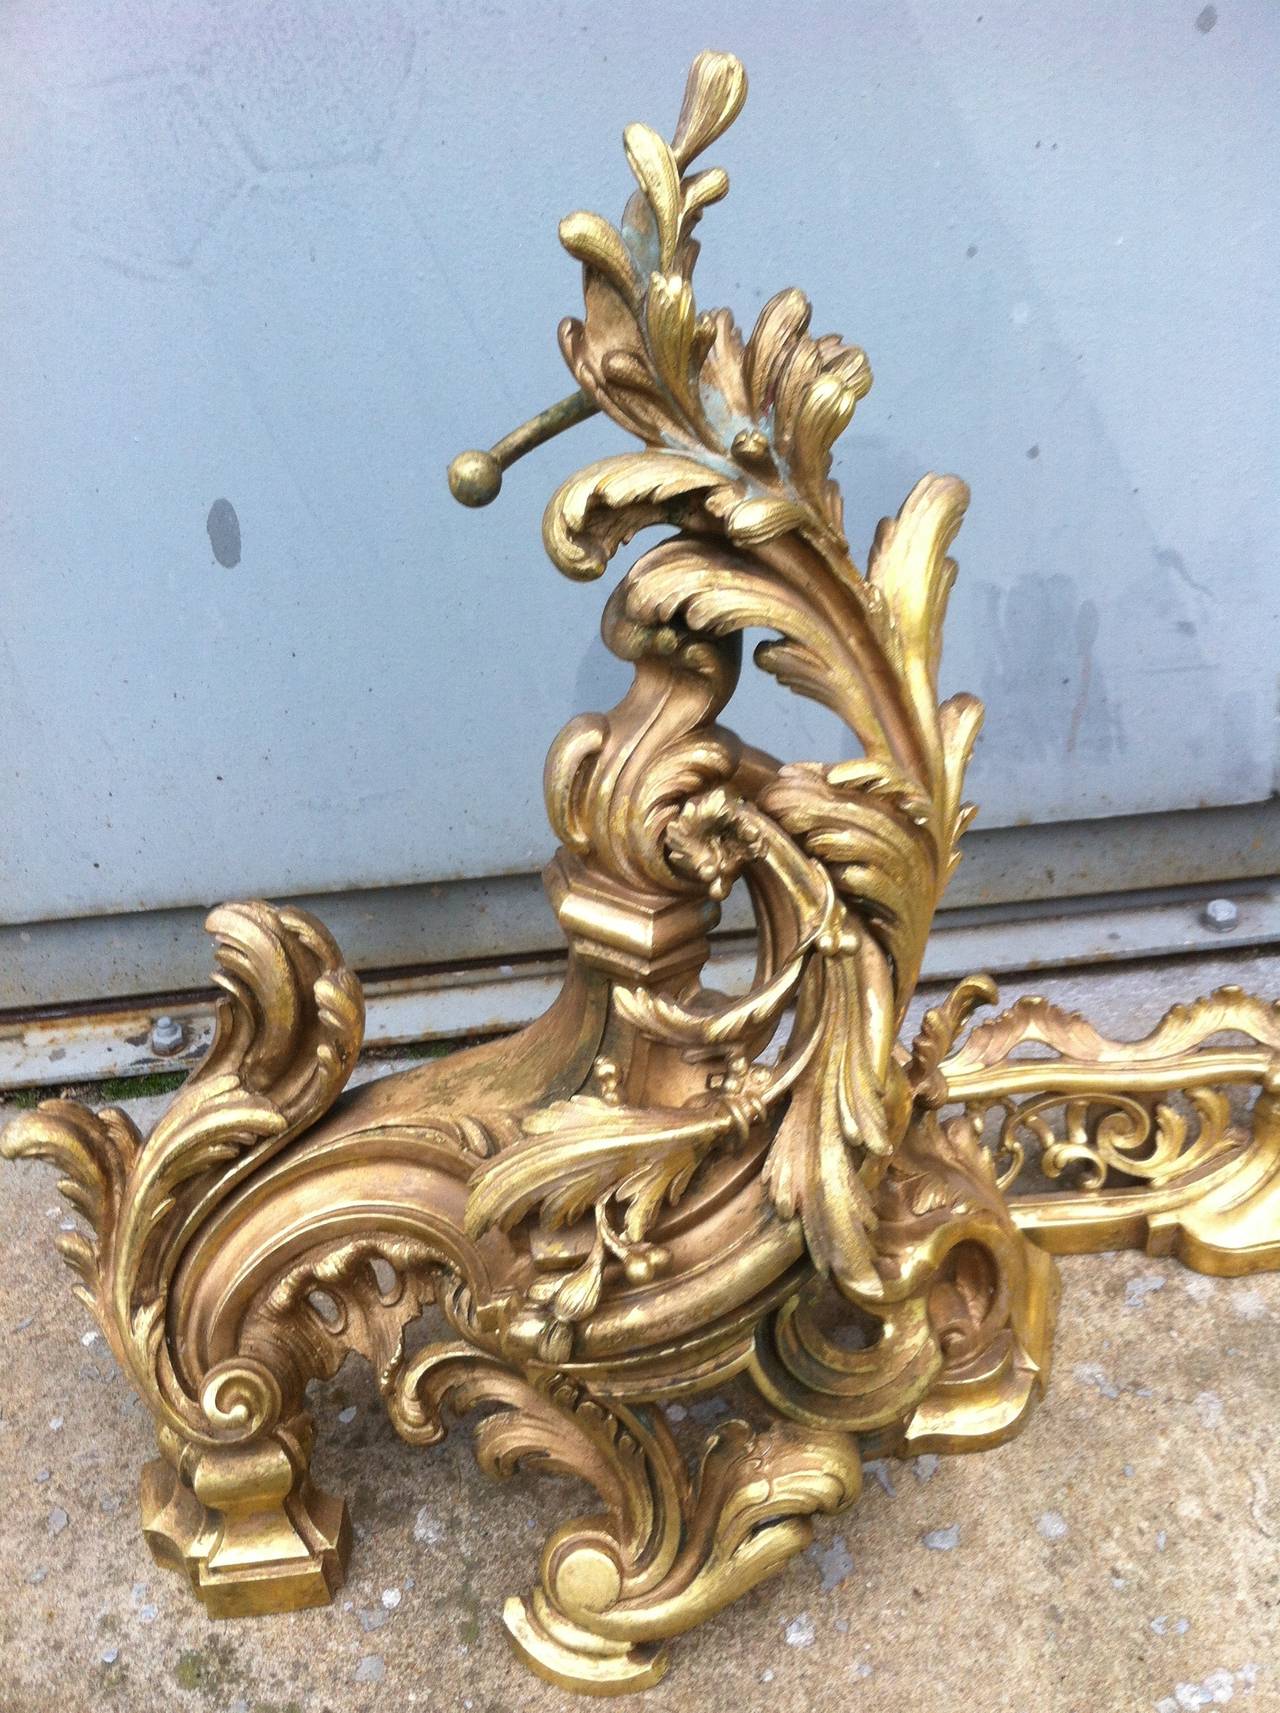 Rare and unique French Parisian antique andirons Regency style, handcrafted in pure solid bronze, early 1800s from Paris in France.

Beautiful quality of French Art work from that period, in excellent condition.
The high quality of this bronze is